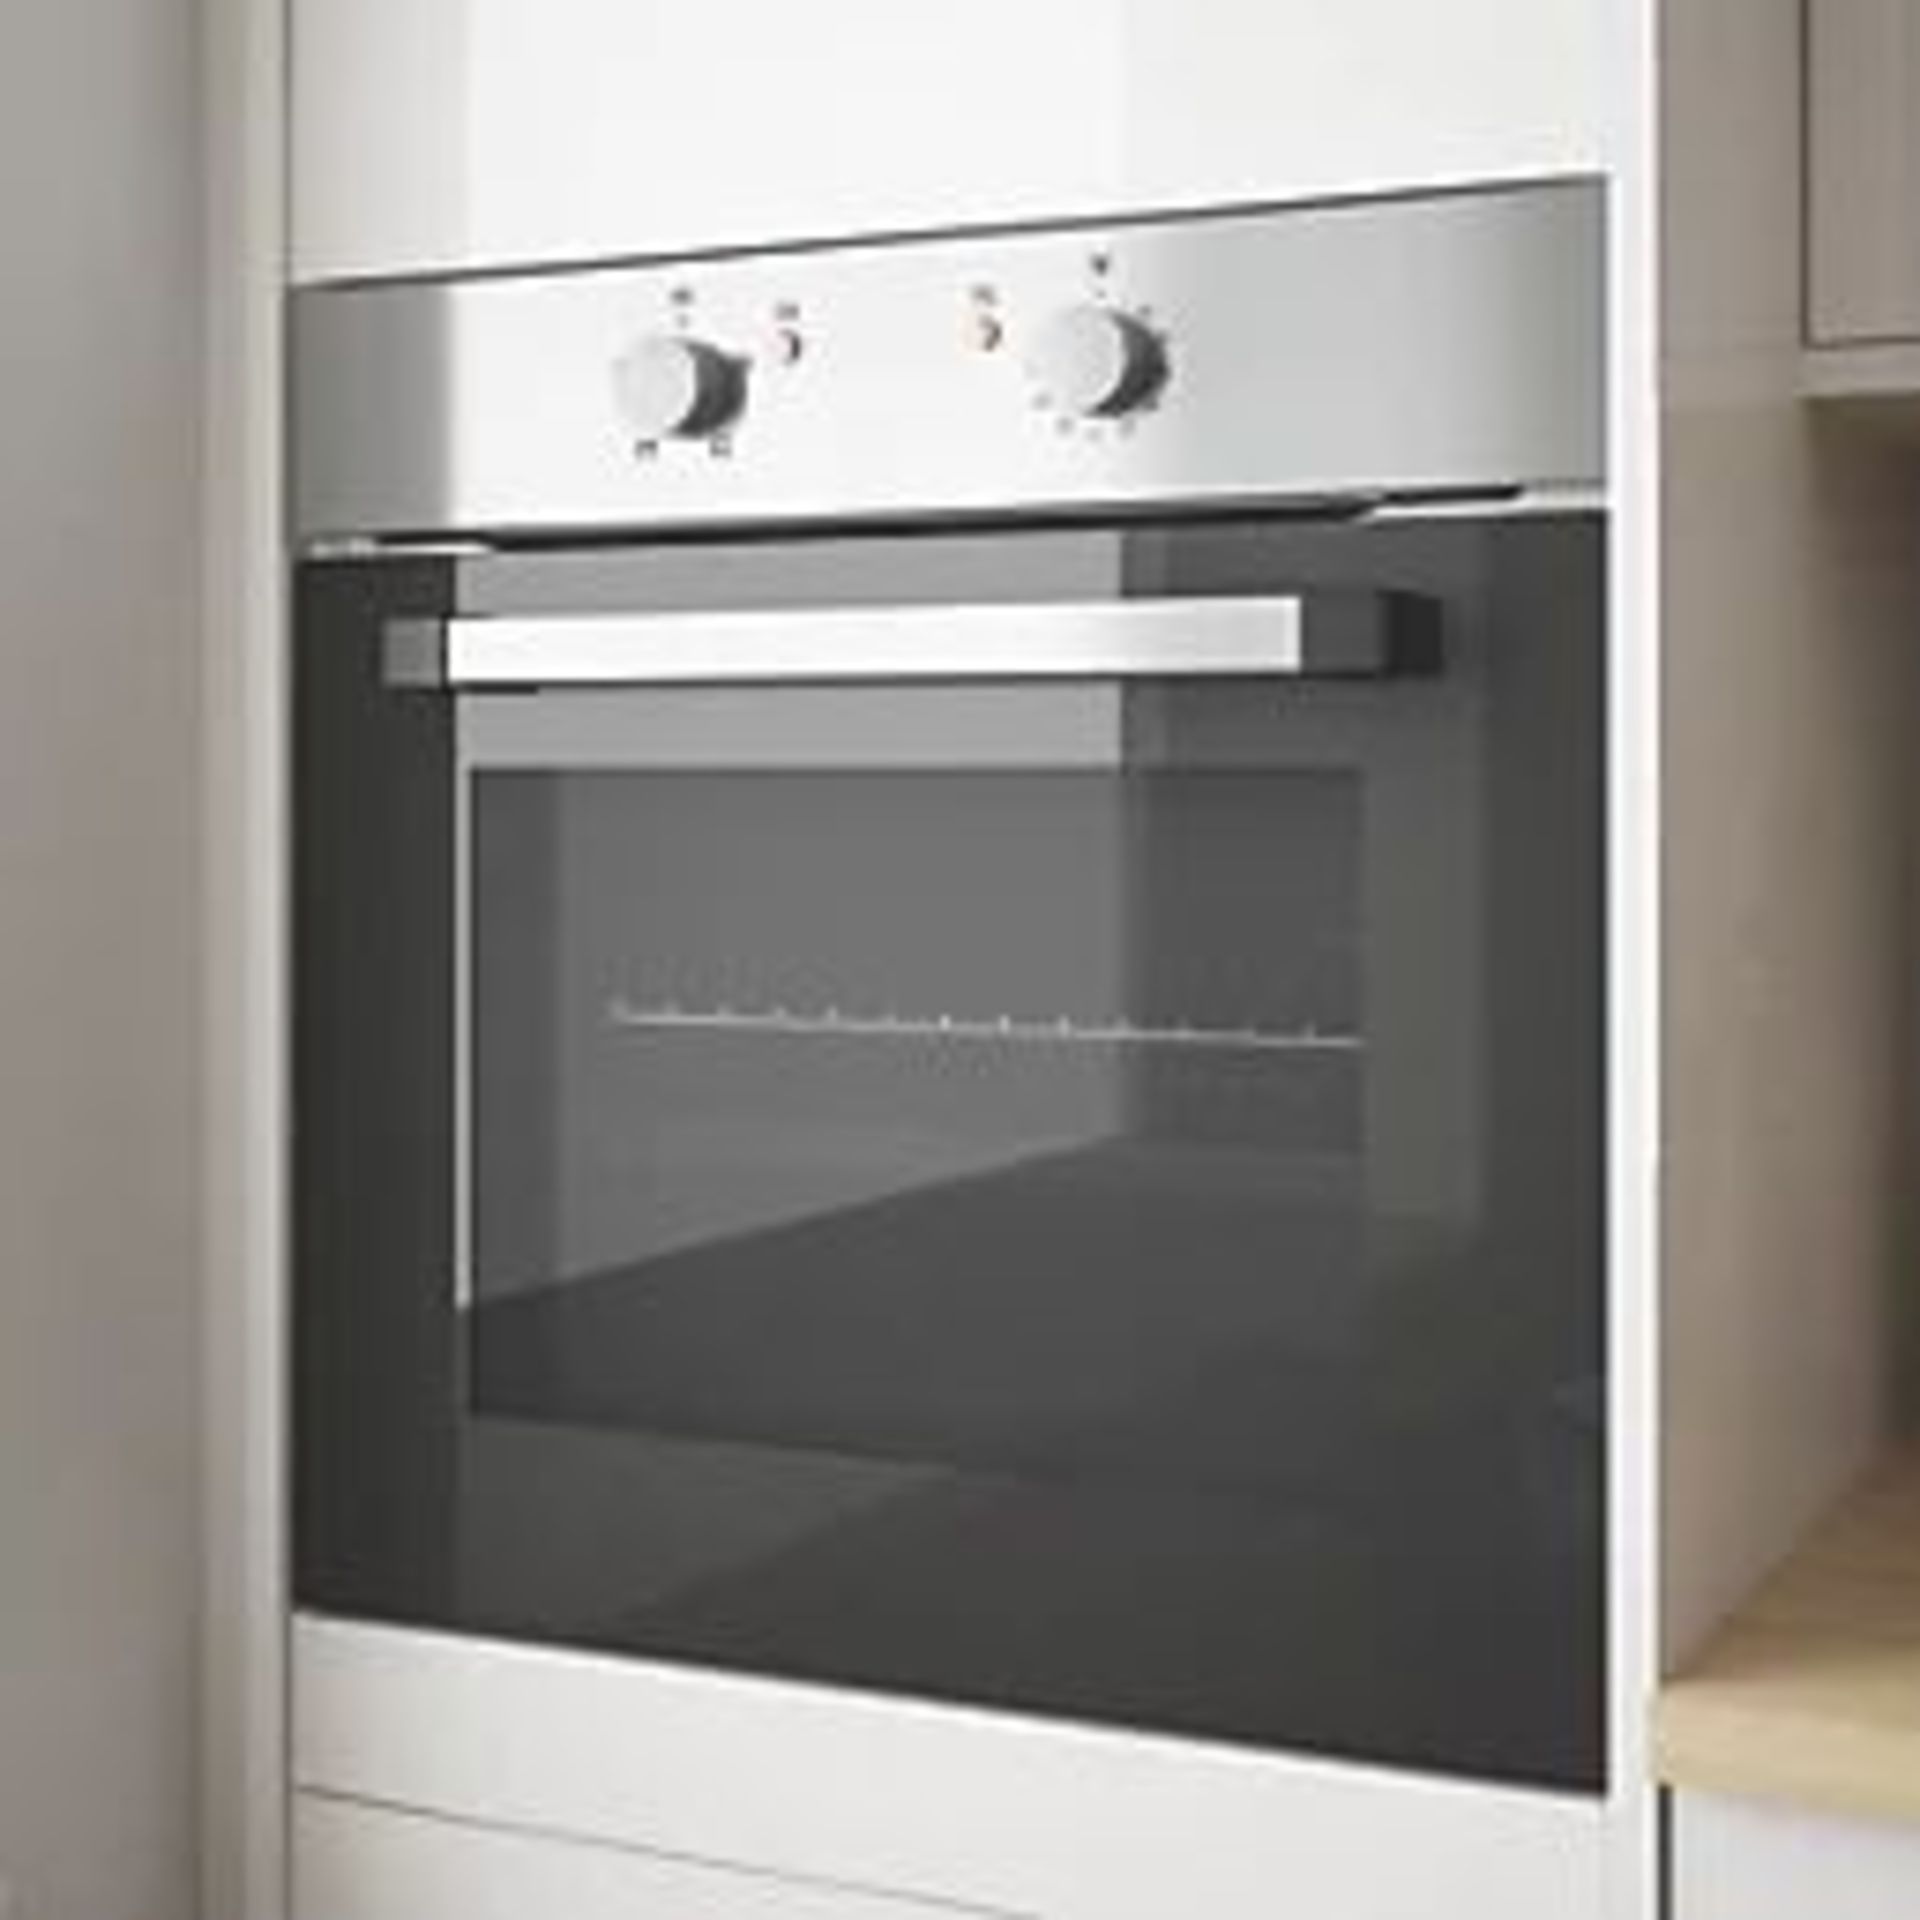 COOKE & LEWIS BUILT- IN SINGLE ELECTRIC OVEN STAINLESS STEEL 595MM X 595MM. - R13a.6.